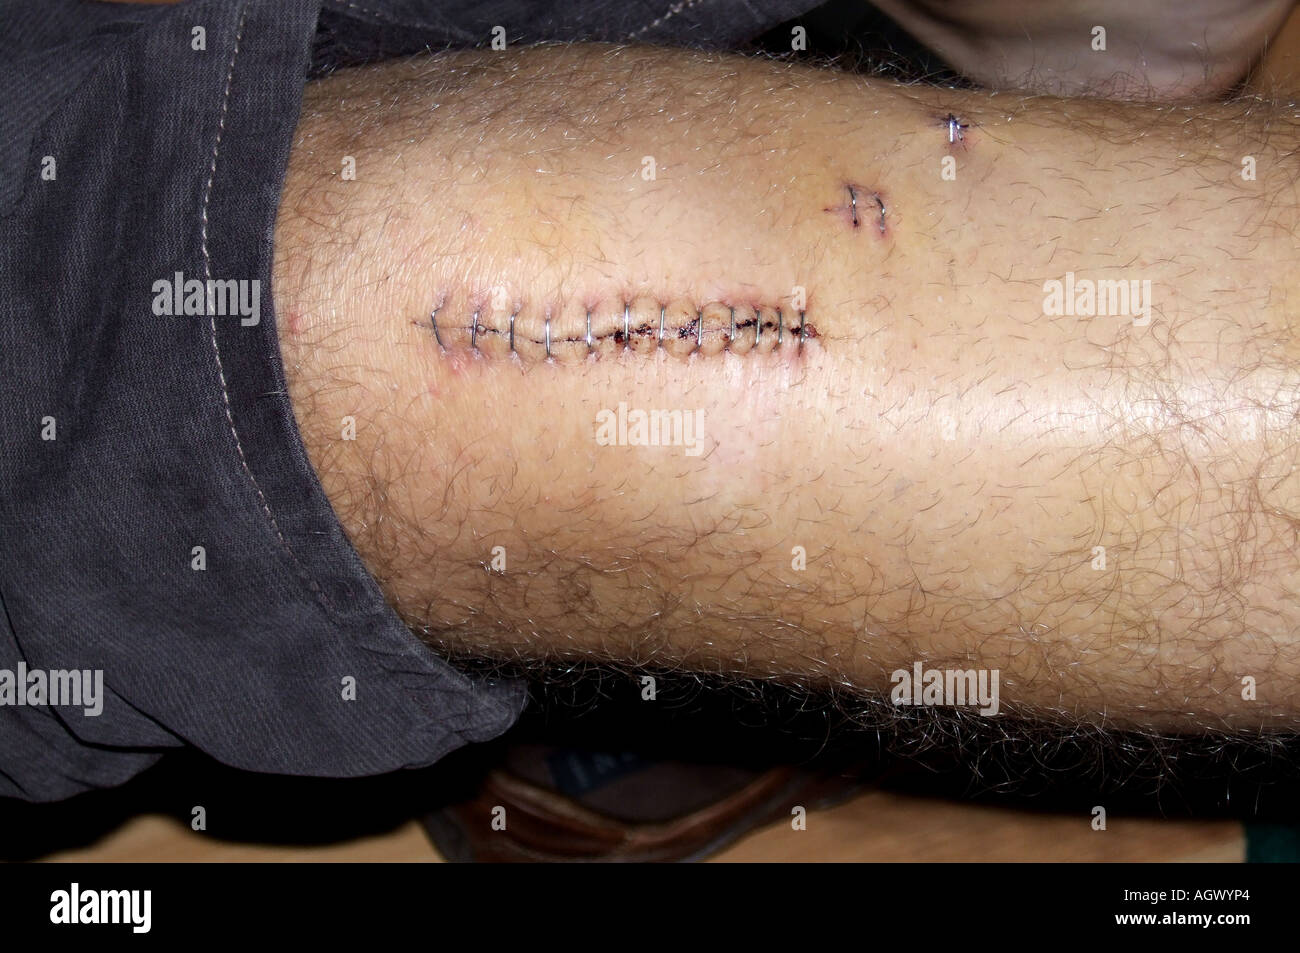 Man, close-up of knee with metal staples following surgery to mend a broken tibea. Stock Photo